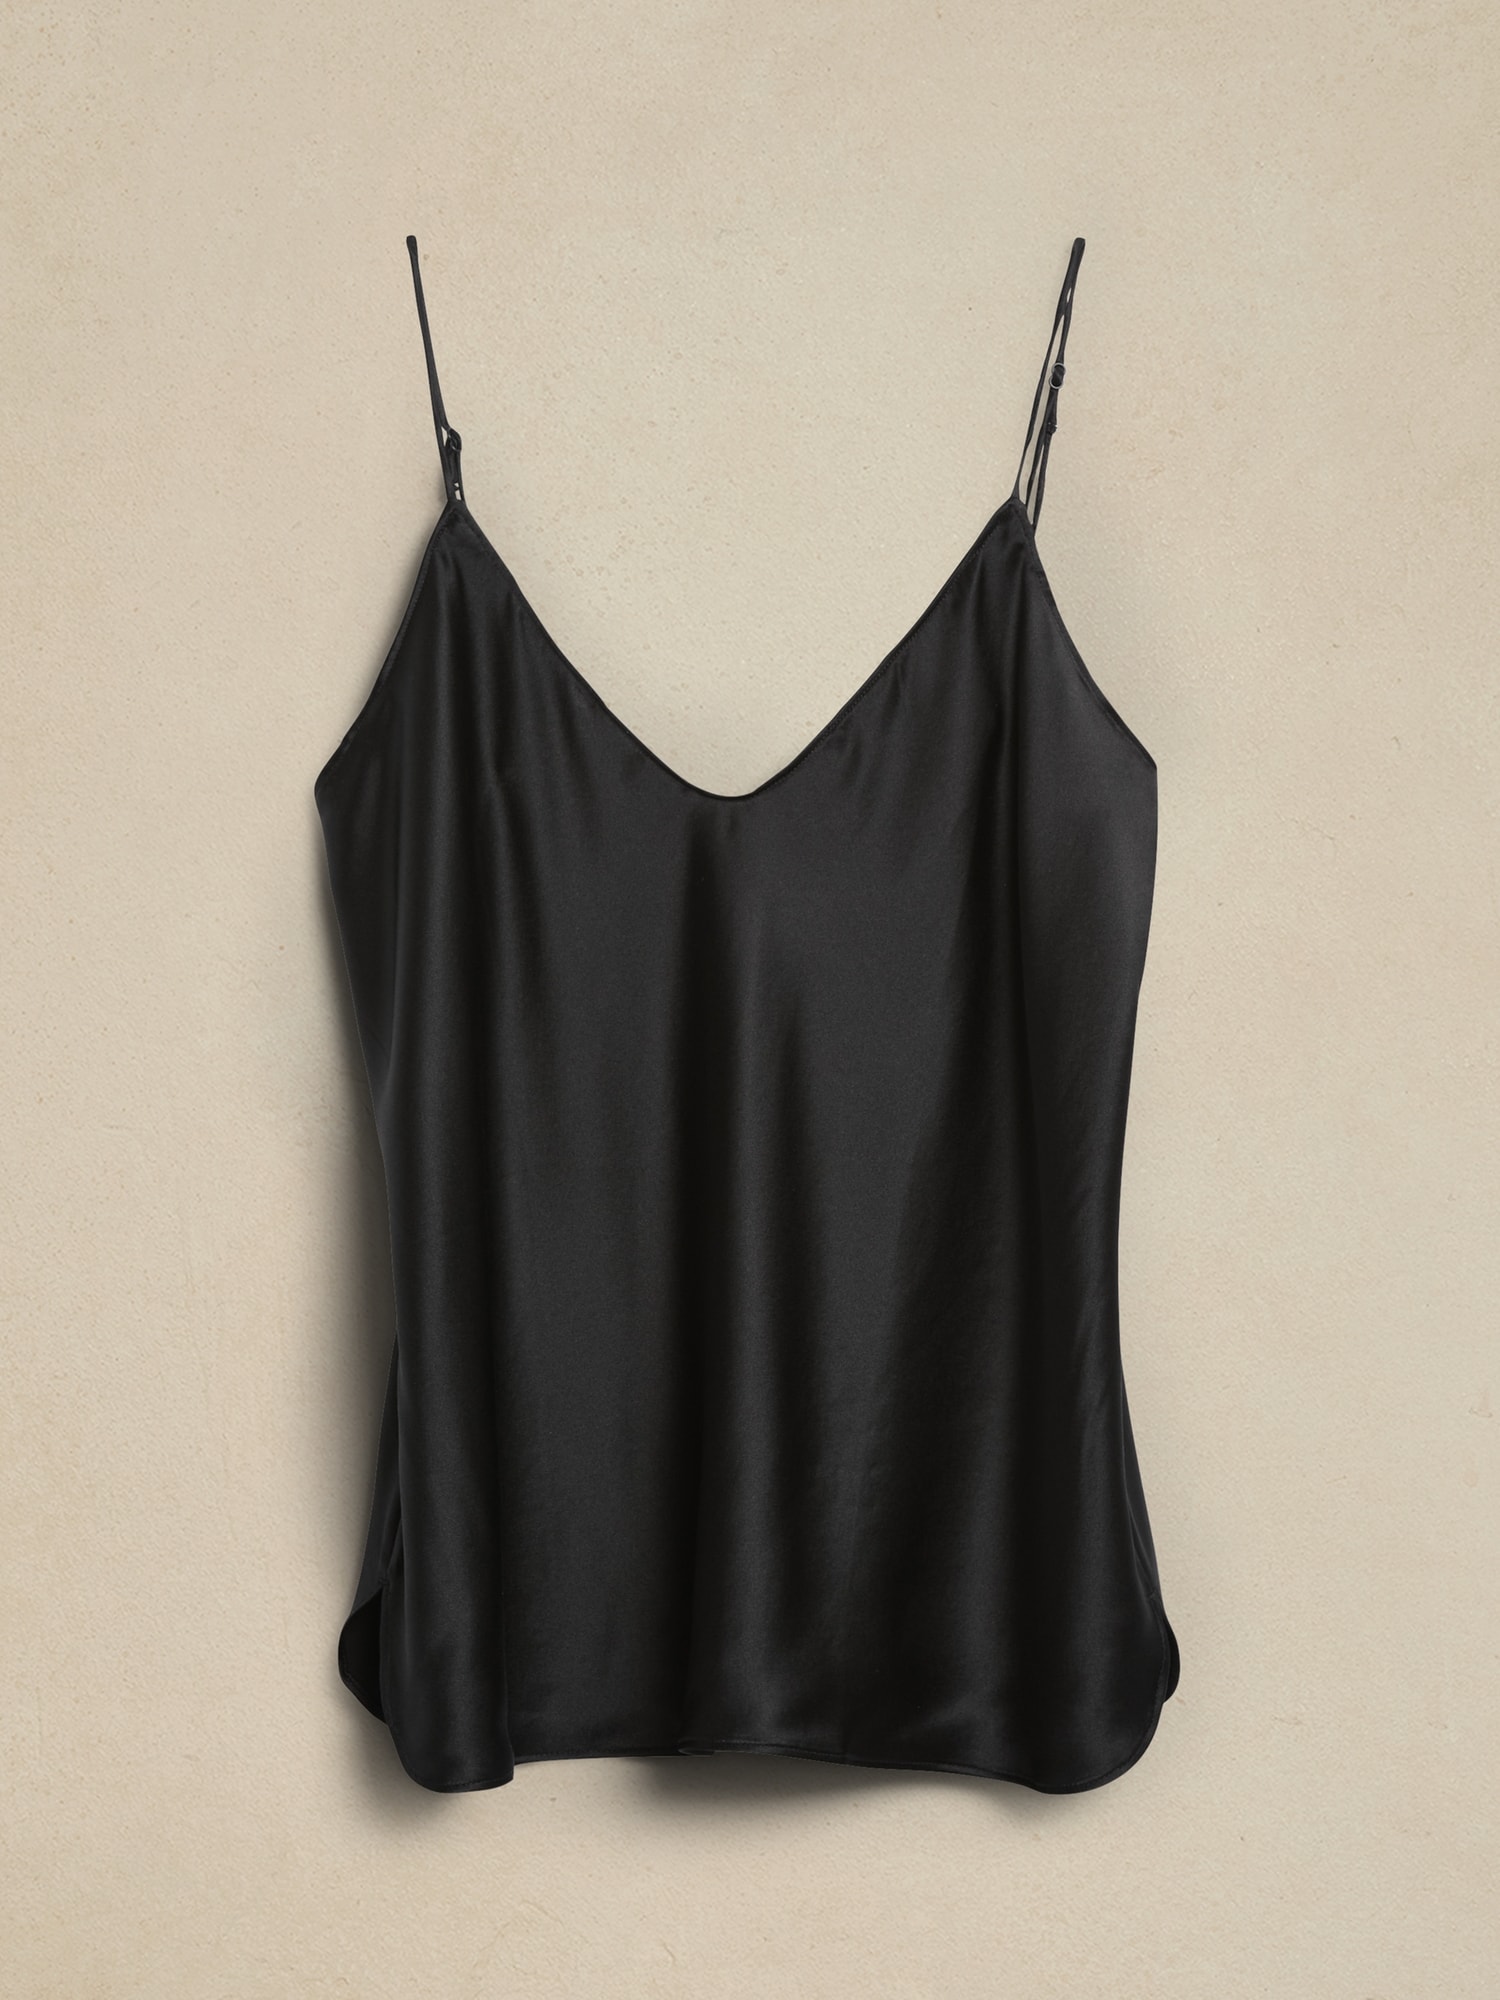 Seed Heritage Top Womens 8 Black Silk Sleeveless Relaxed Fit Camisole Tank